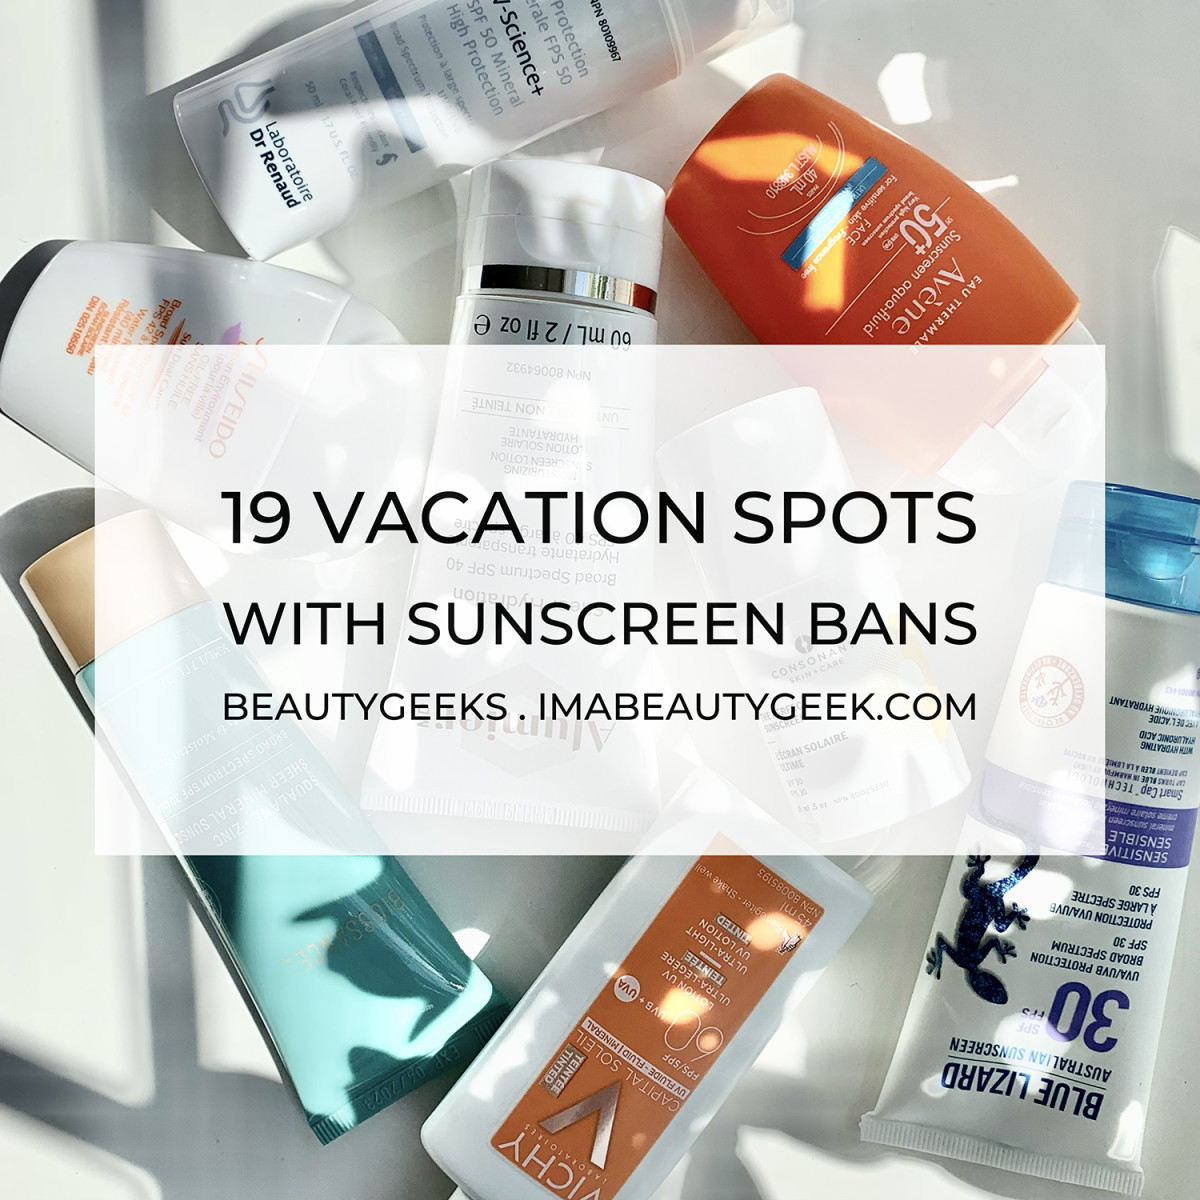 19 vacation spots with sunscreen bans